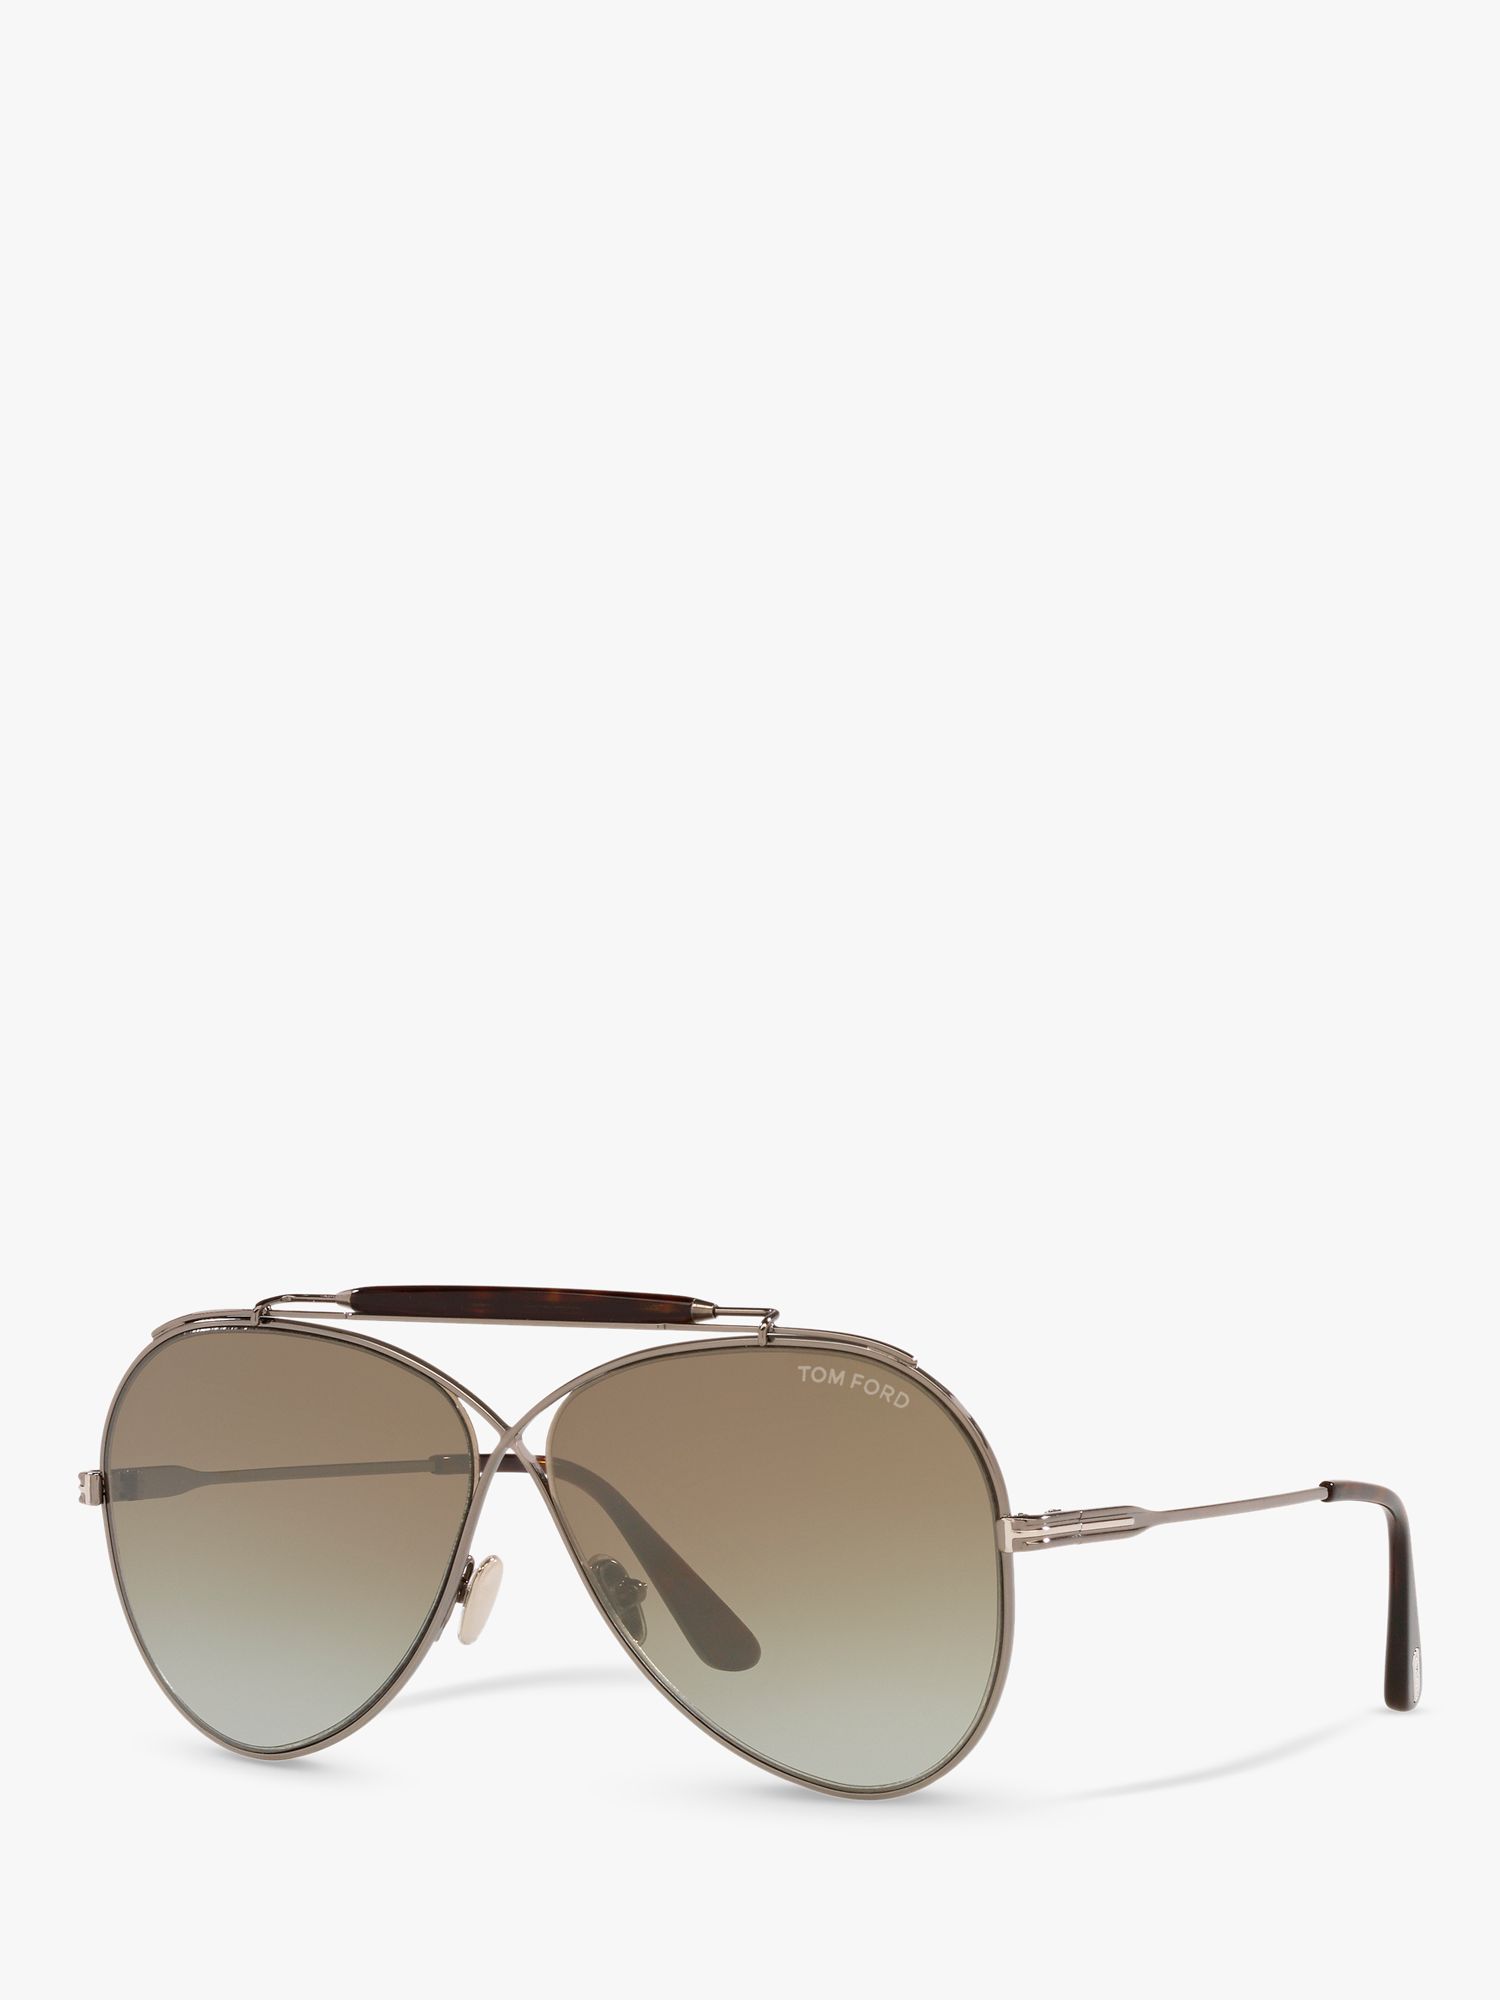 TOM FORD FT0818 Unisex Holden Aviator Sunglasses, Gold/Mirror Brown at ...